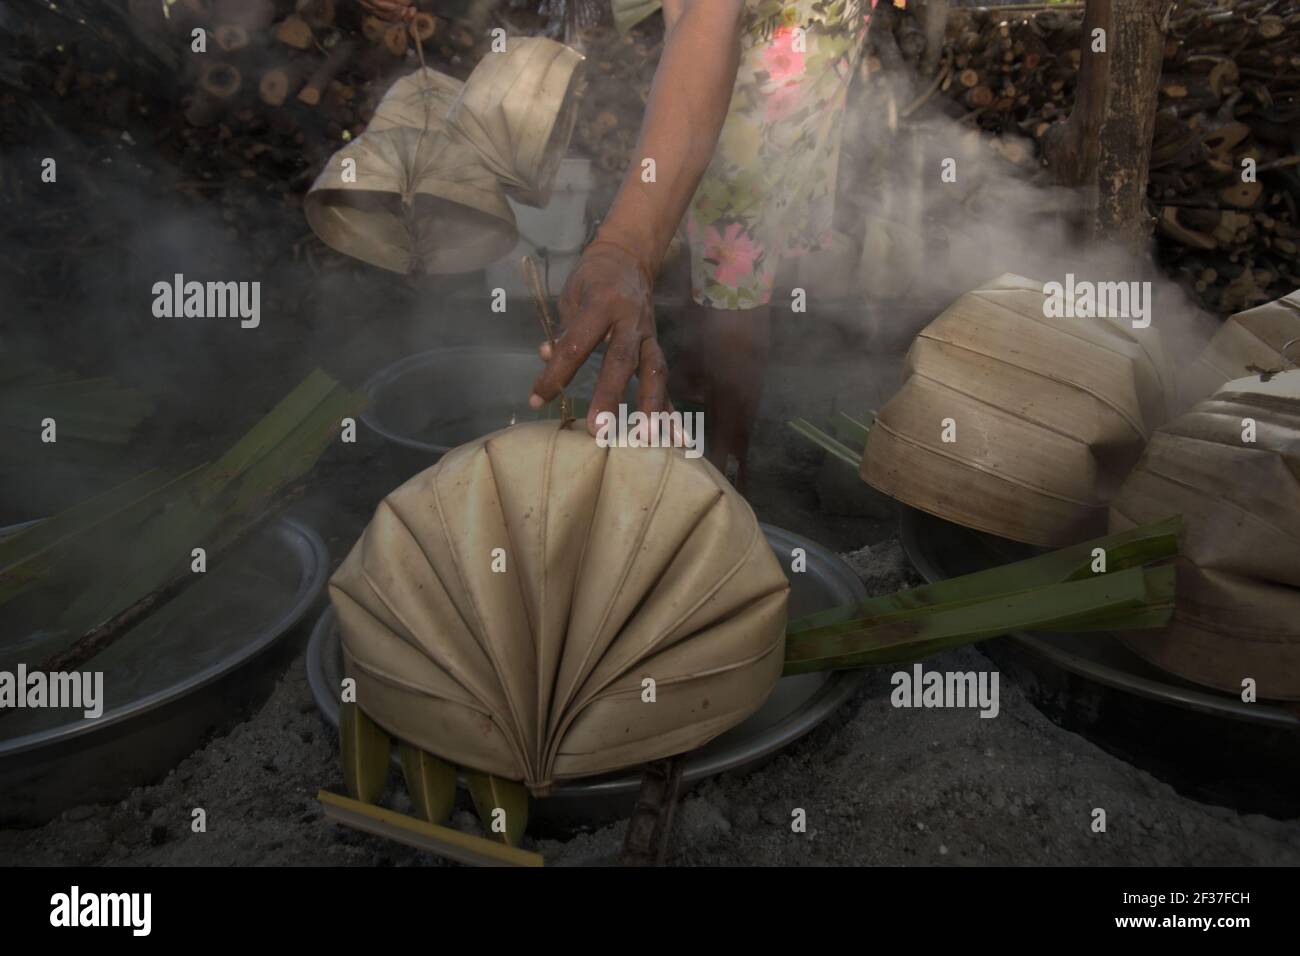 A woman boiling palm sap to make palm sugar, an alternative source of income for villagers living in Rote Island, Indonesia. Stock Photo